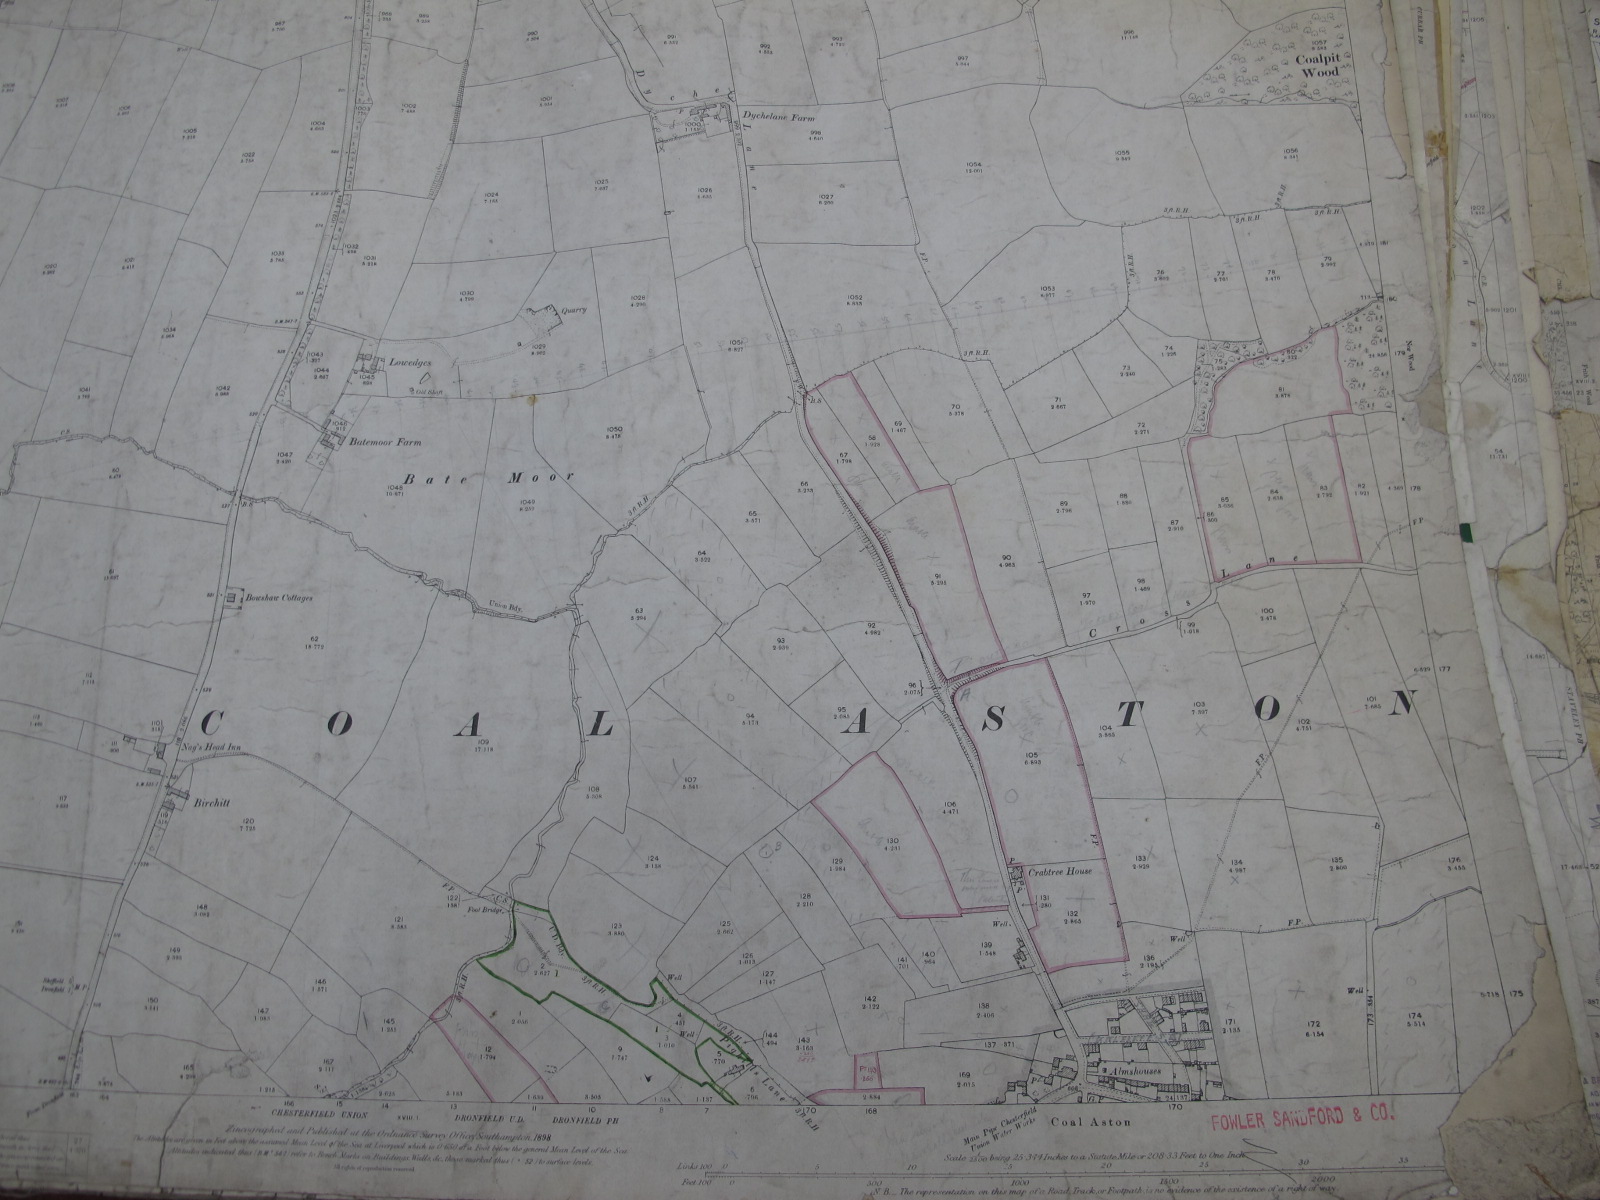 Derbyshire Maps, to include Eckington, Renishaw, Coal Aston, Scarsdale, Dronfield, Dronfield - Image 3 of 11